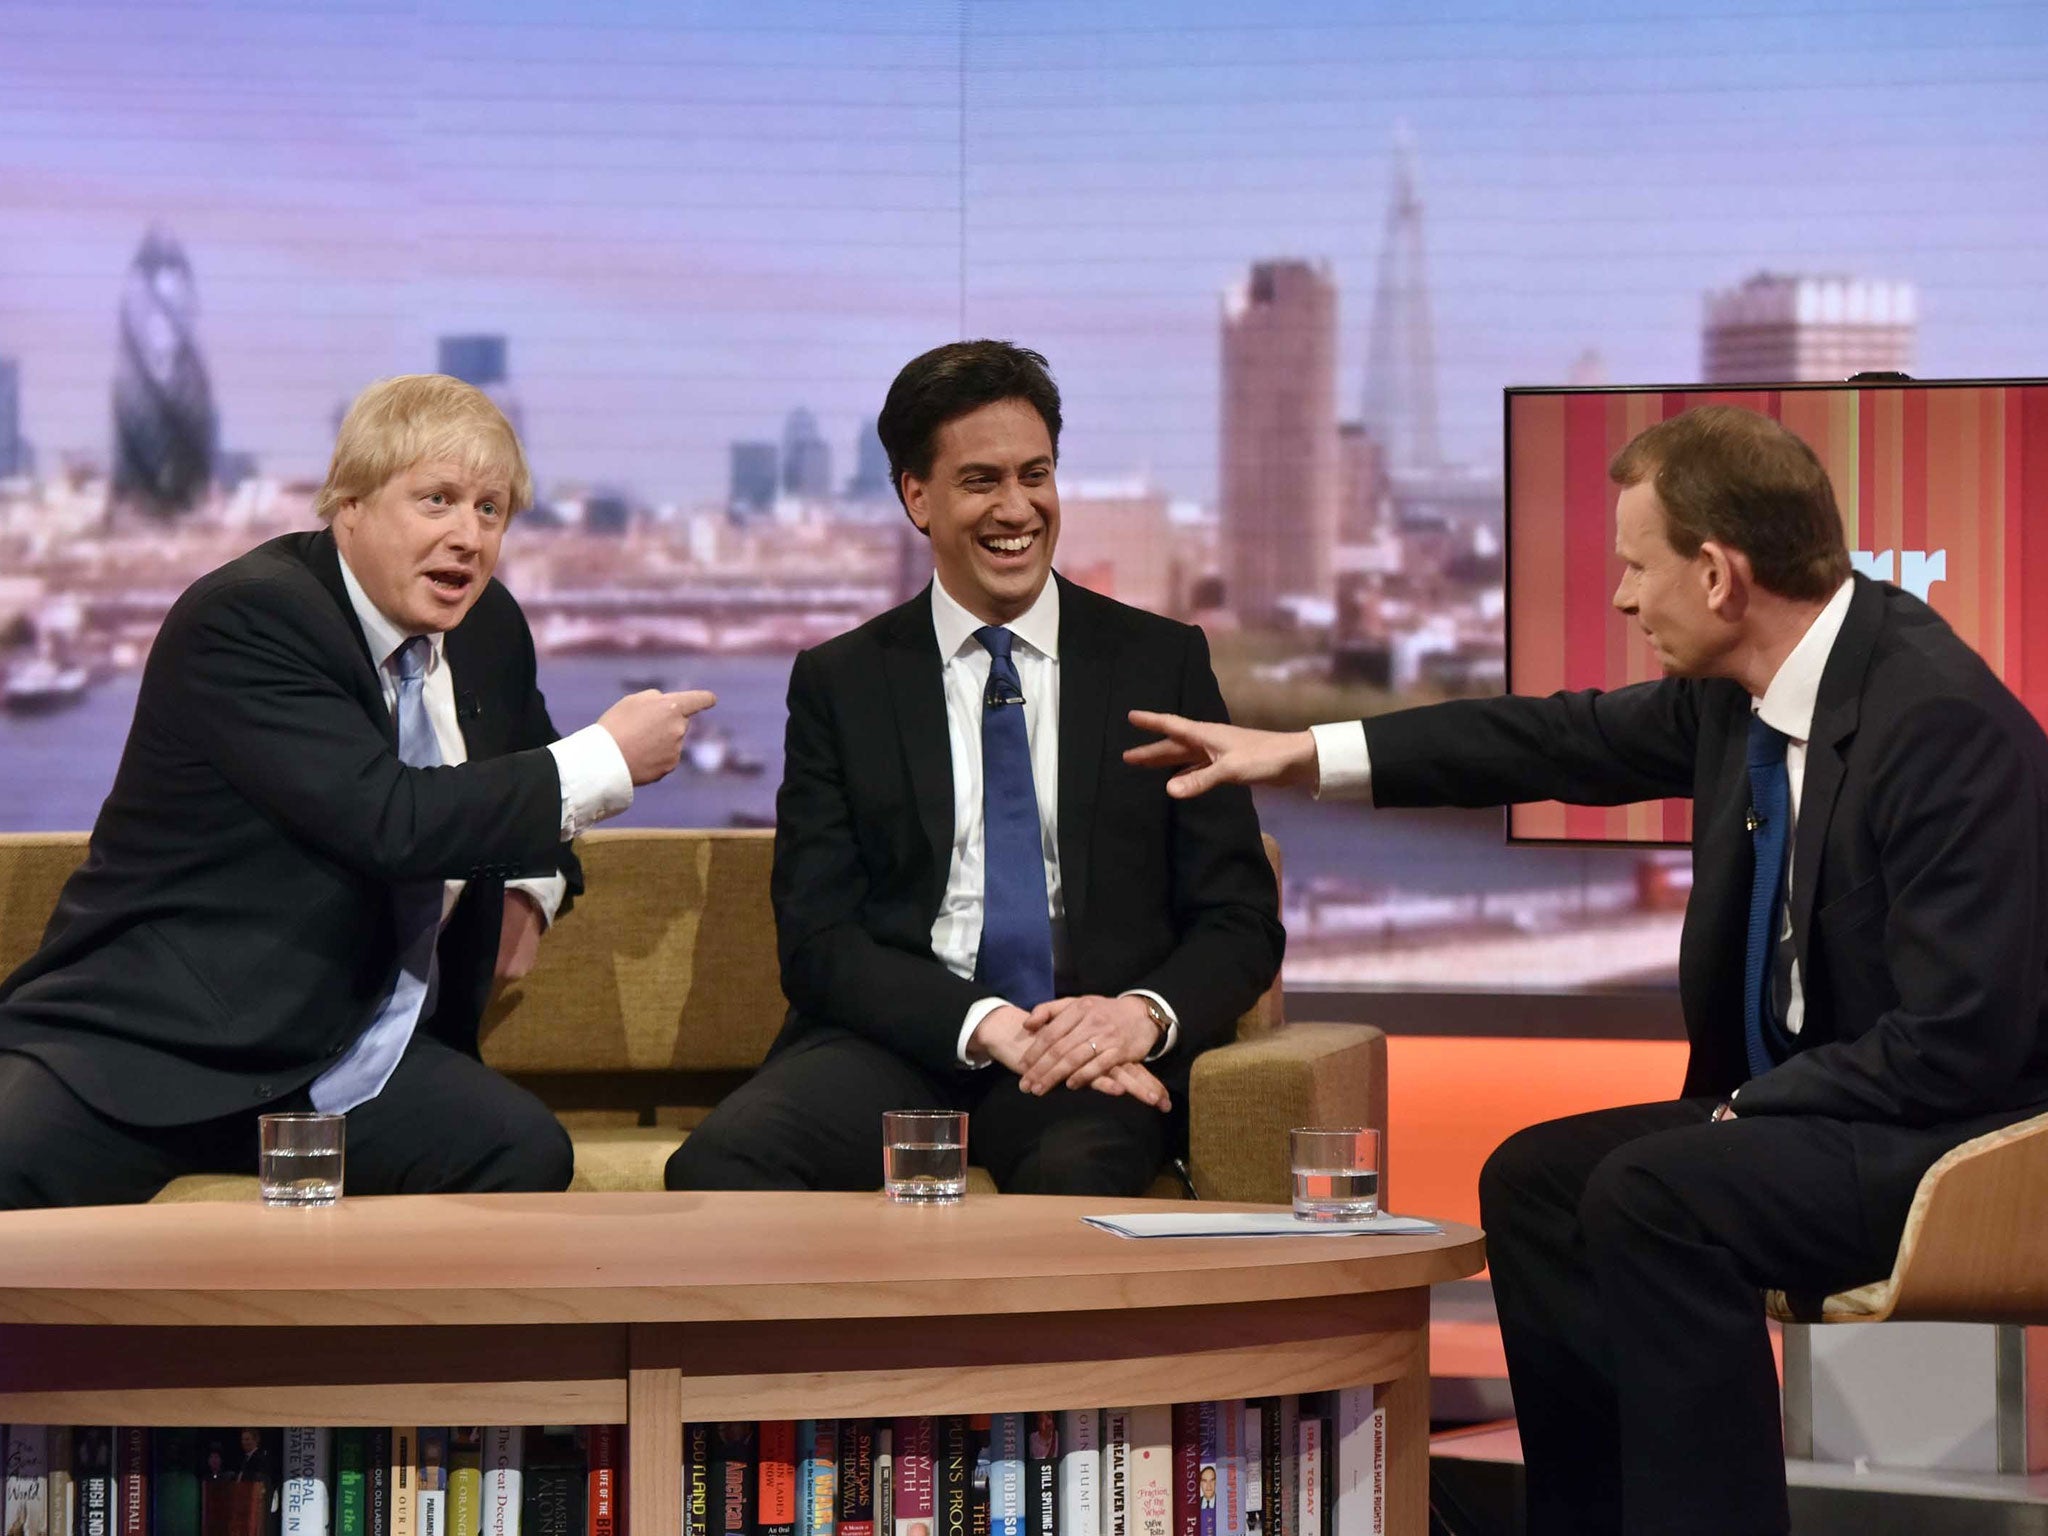 Boris Johnson, Labour Party leader Ed Miliband and Andrew Marr appearing on BBC One's The Andrew Marr Show